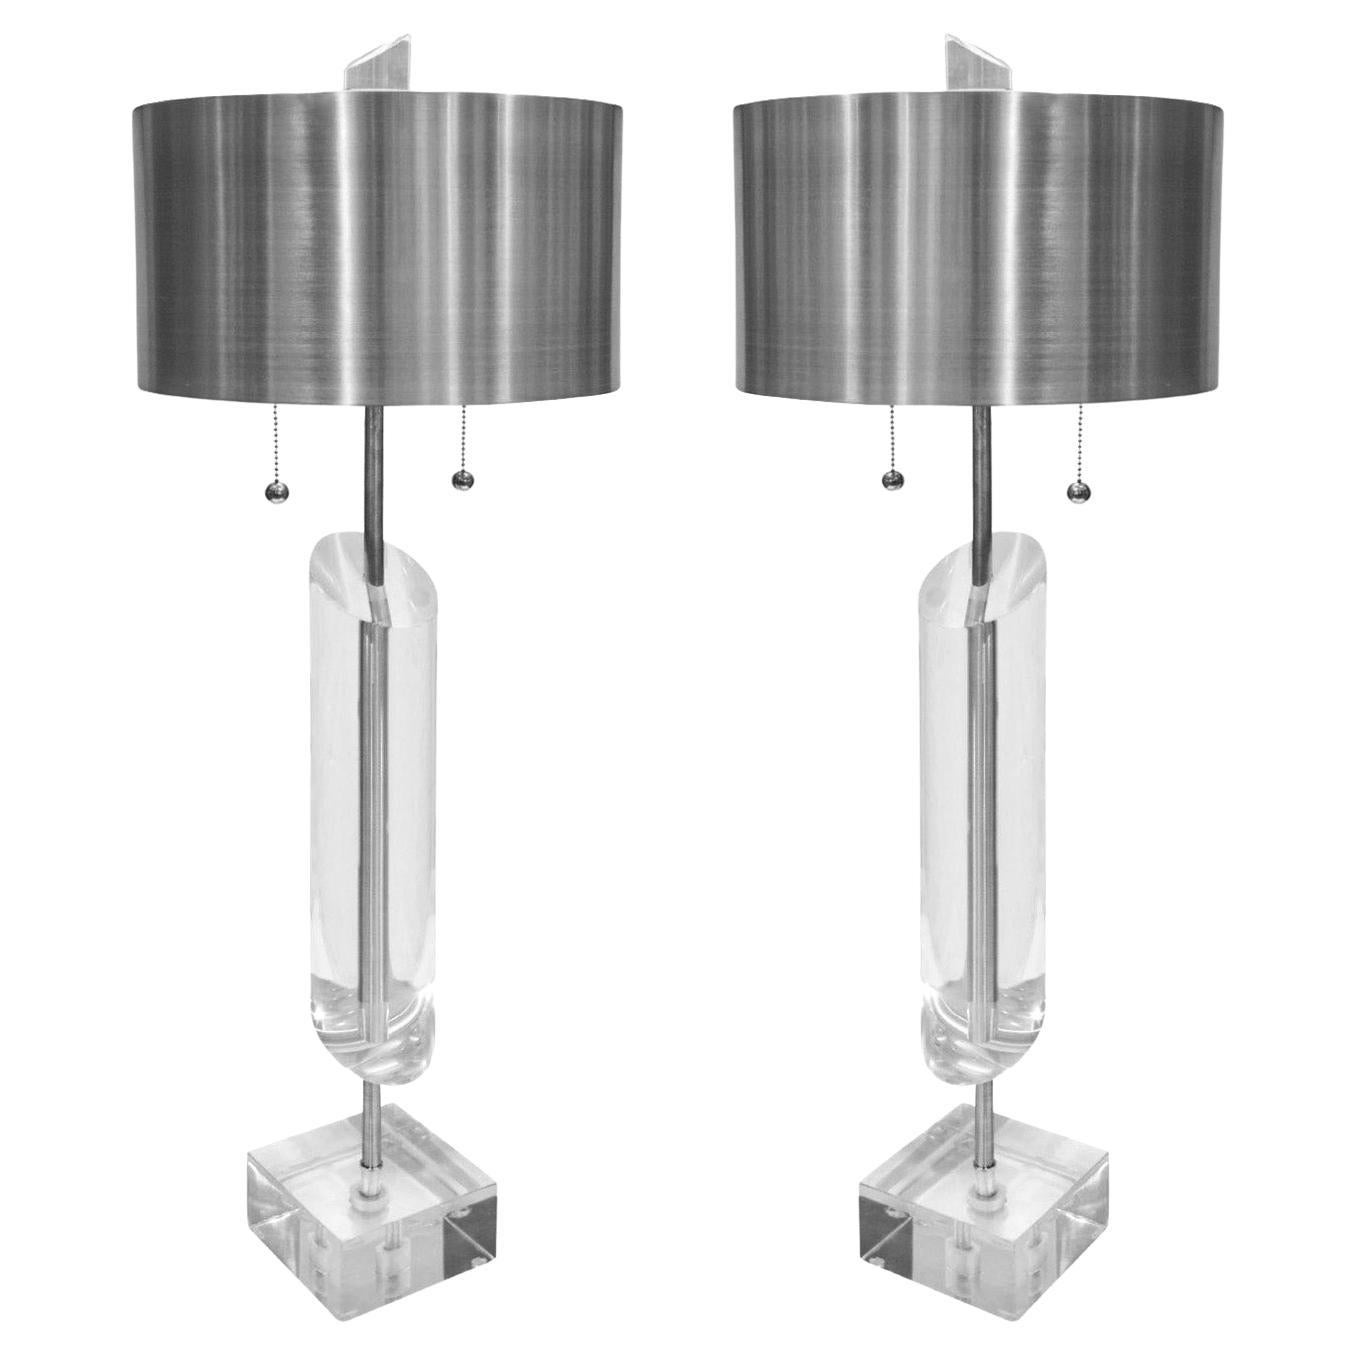 Van Teal Pair of Sculptural Lucite Lamps with Aluminum Shades, 1970s (Signed)